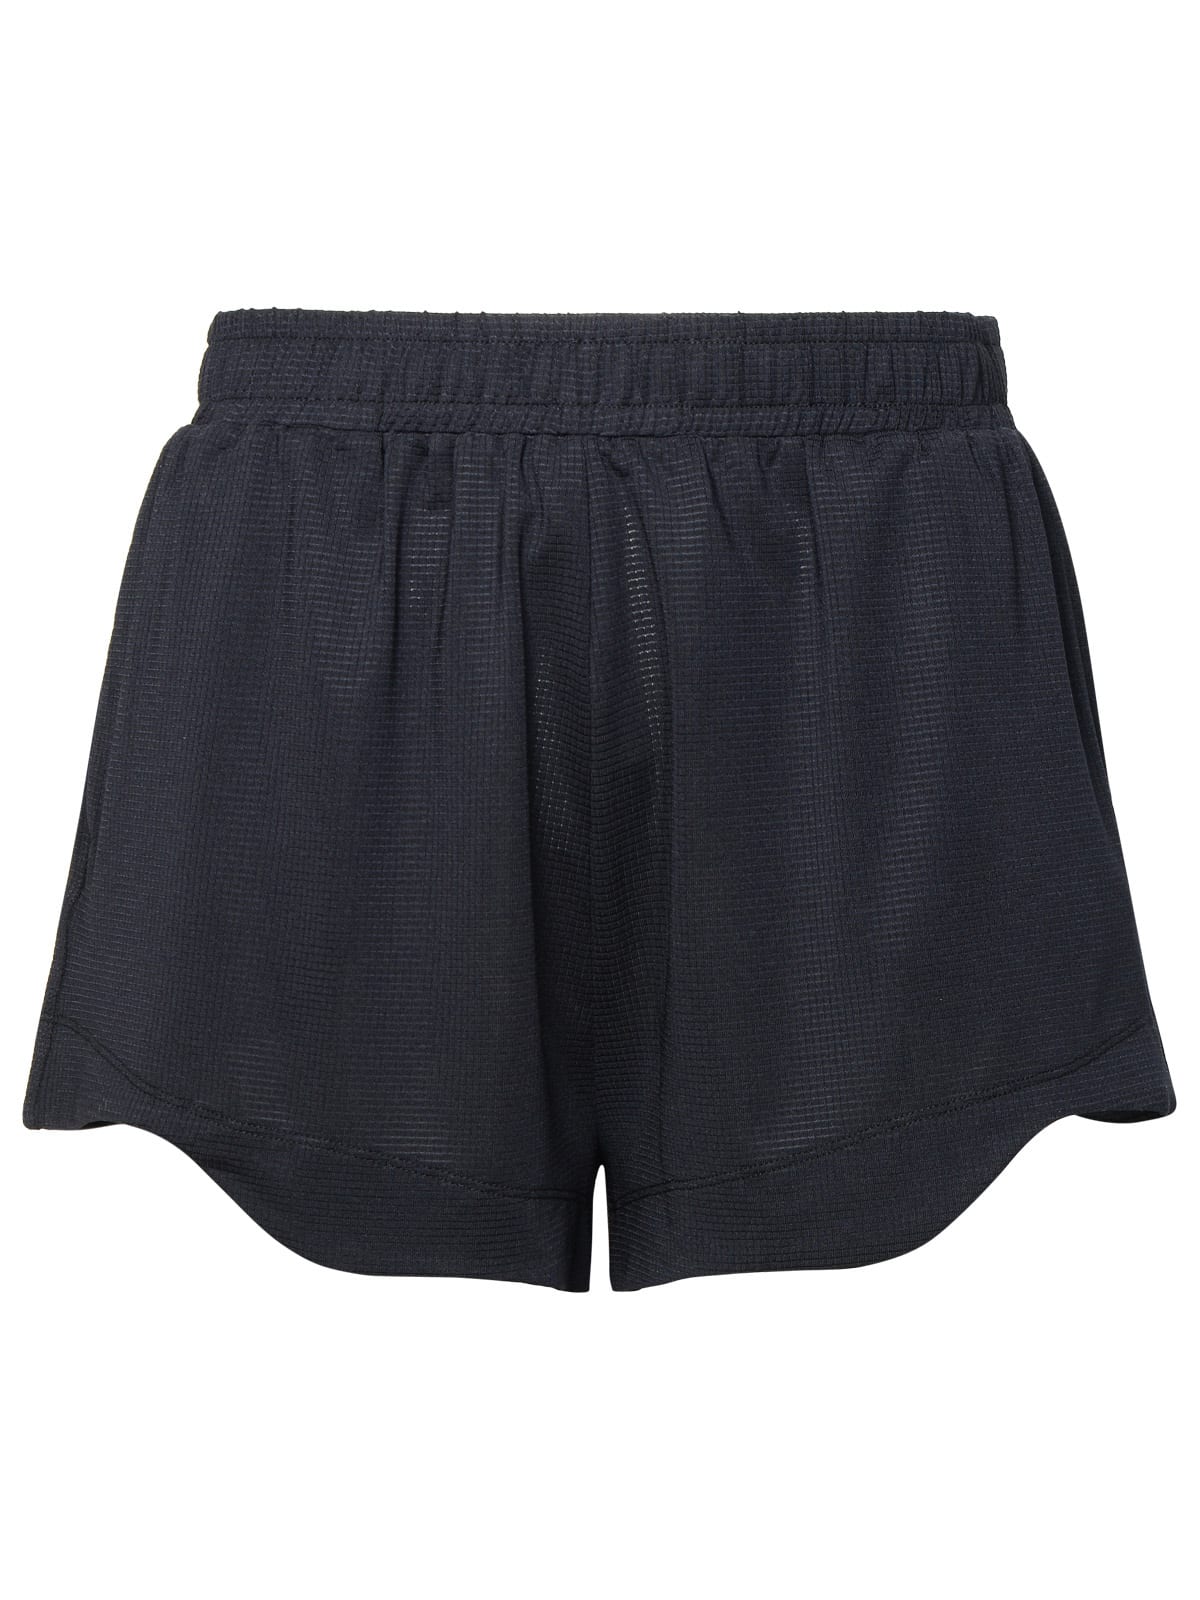 active Shorts In Black Recycled Polyester Blend